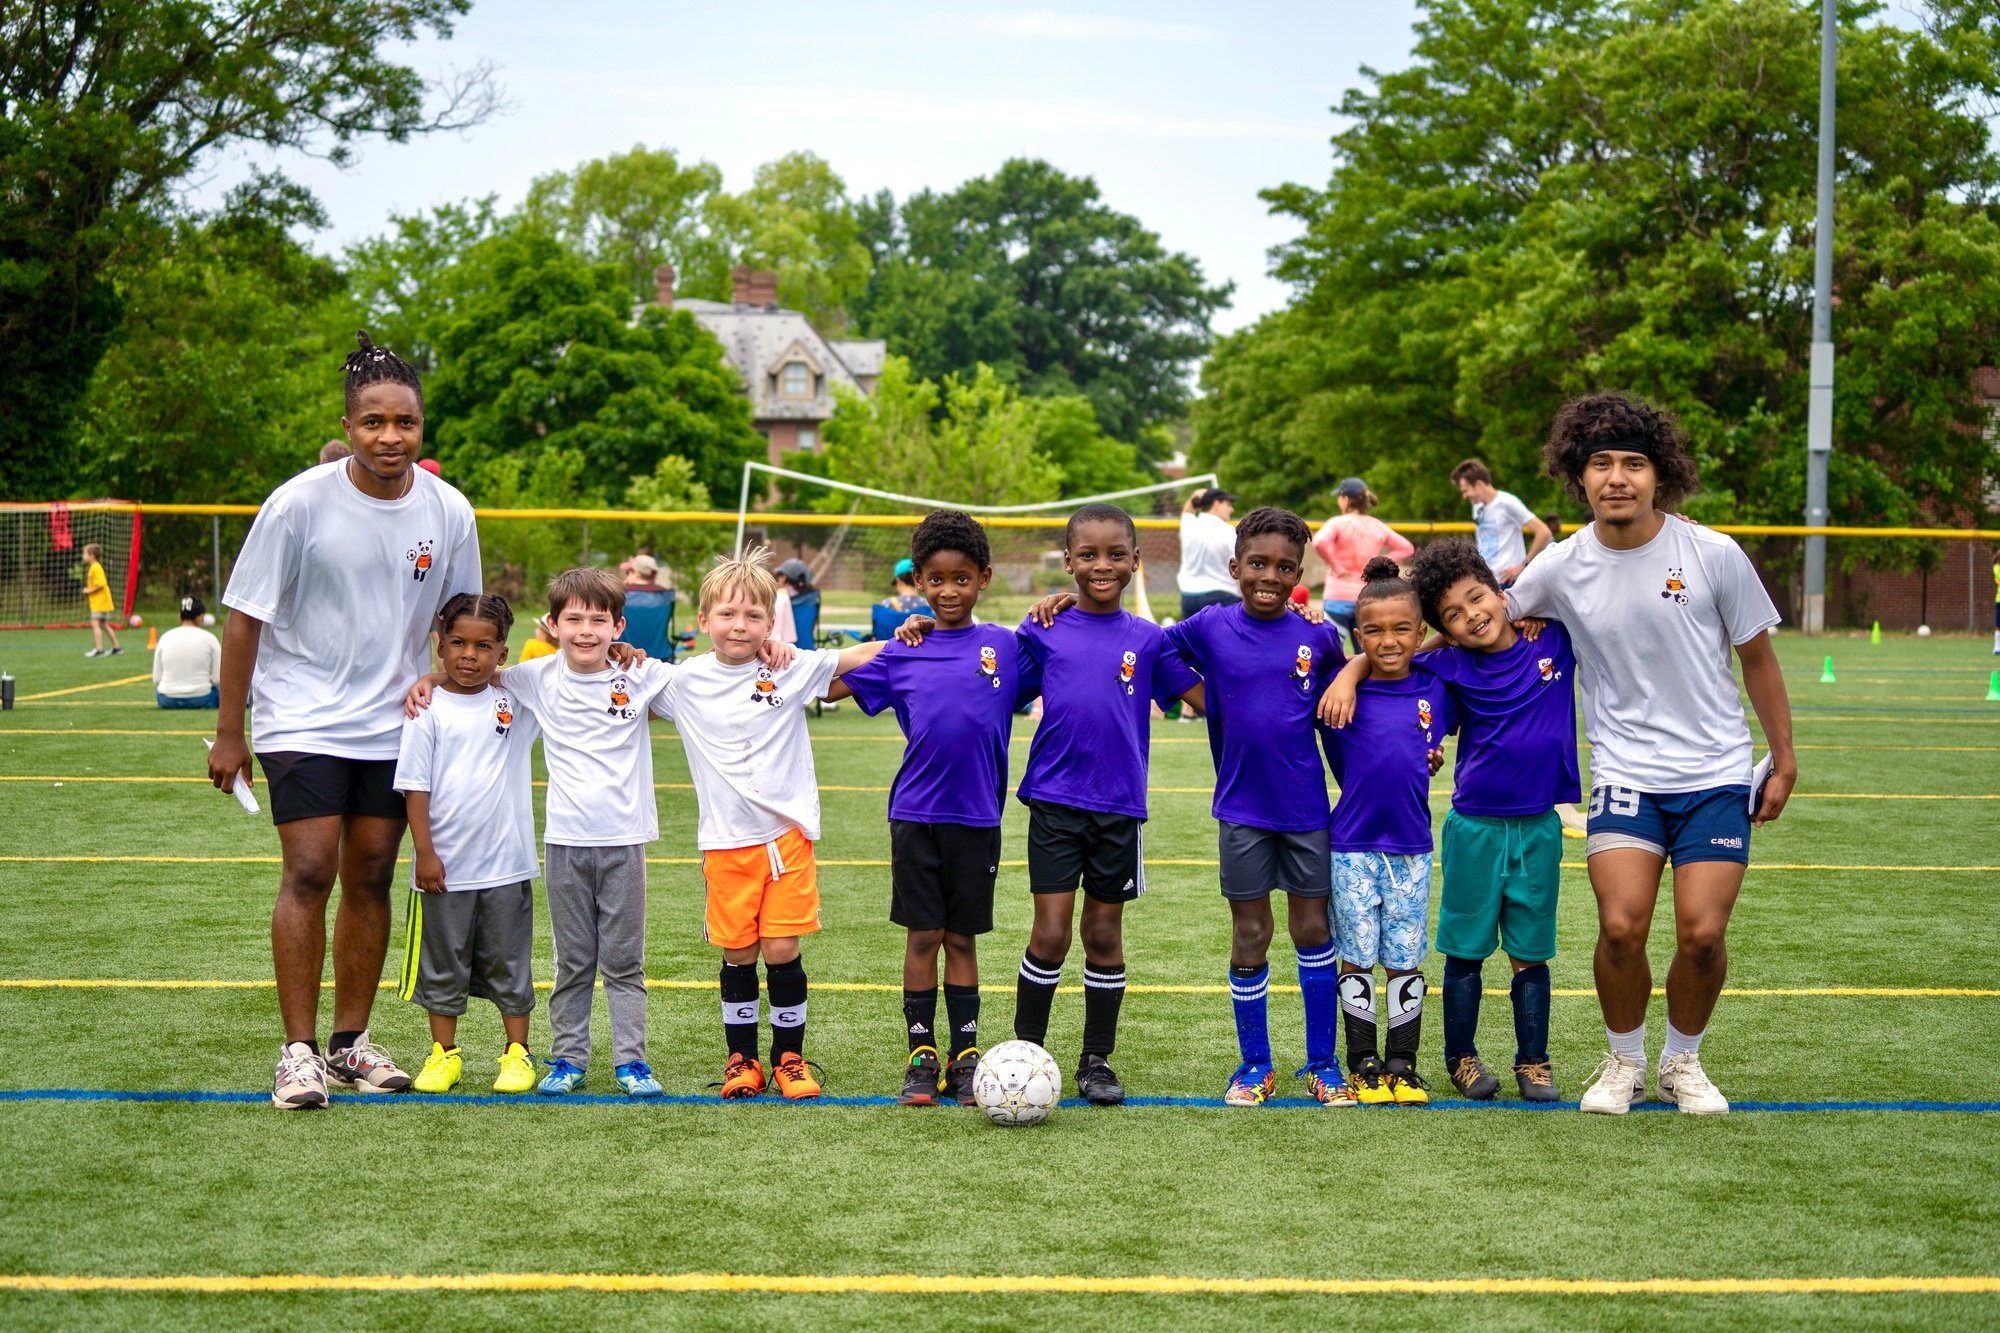 Dc-way-soccer-club-for-kids-in-washington-dc-capitol-hill-league-at-brentwood-hamilton-park-06-03-2023 0060 copy.jpg